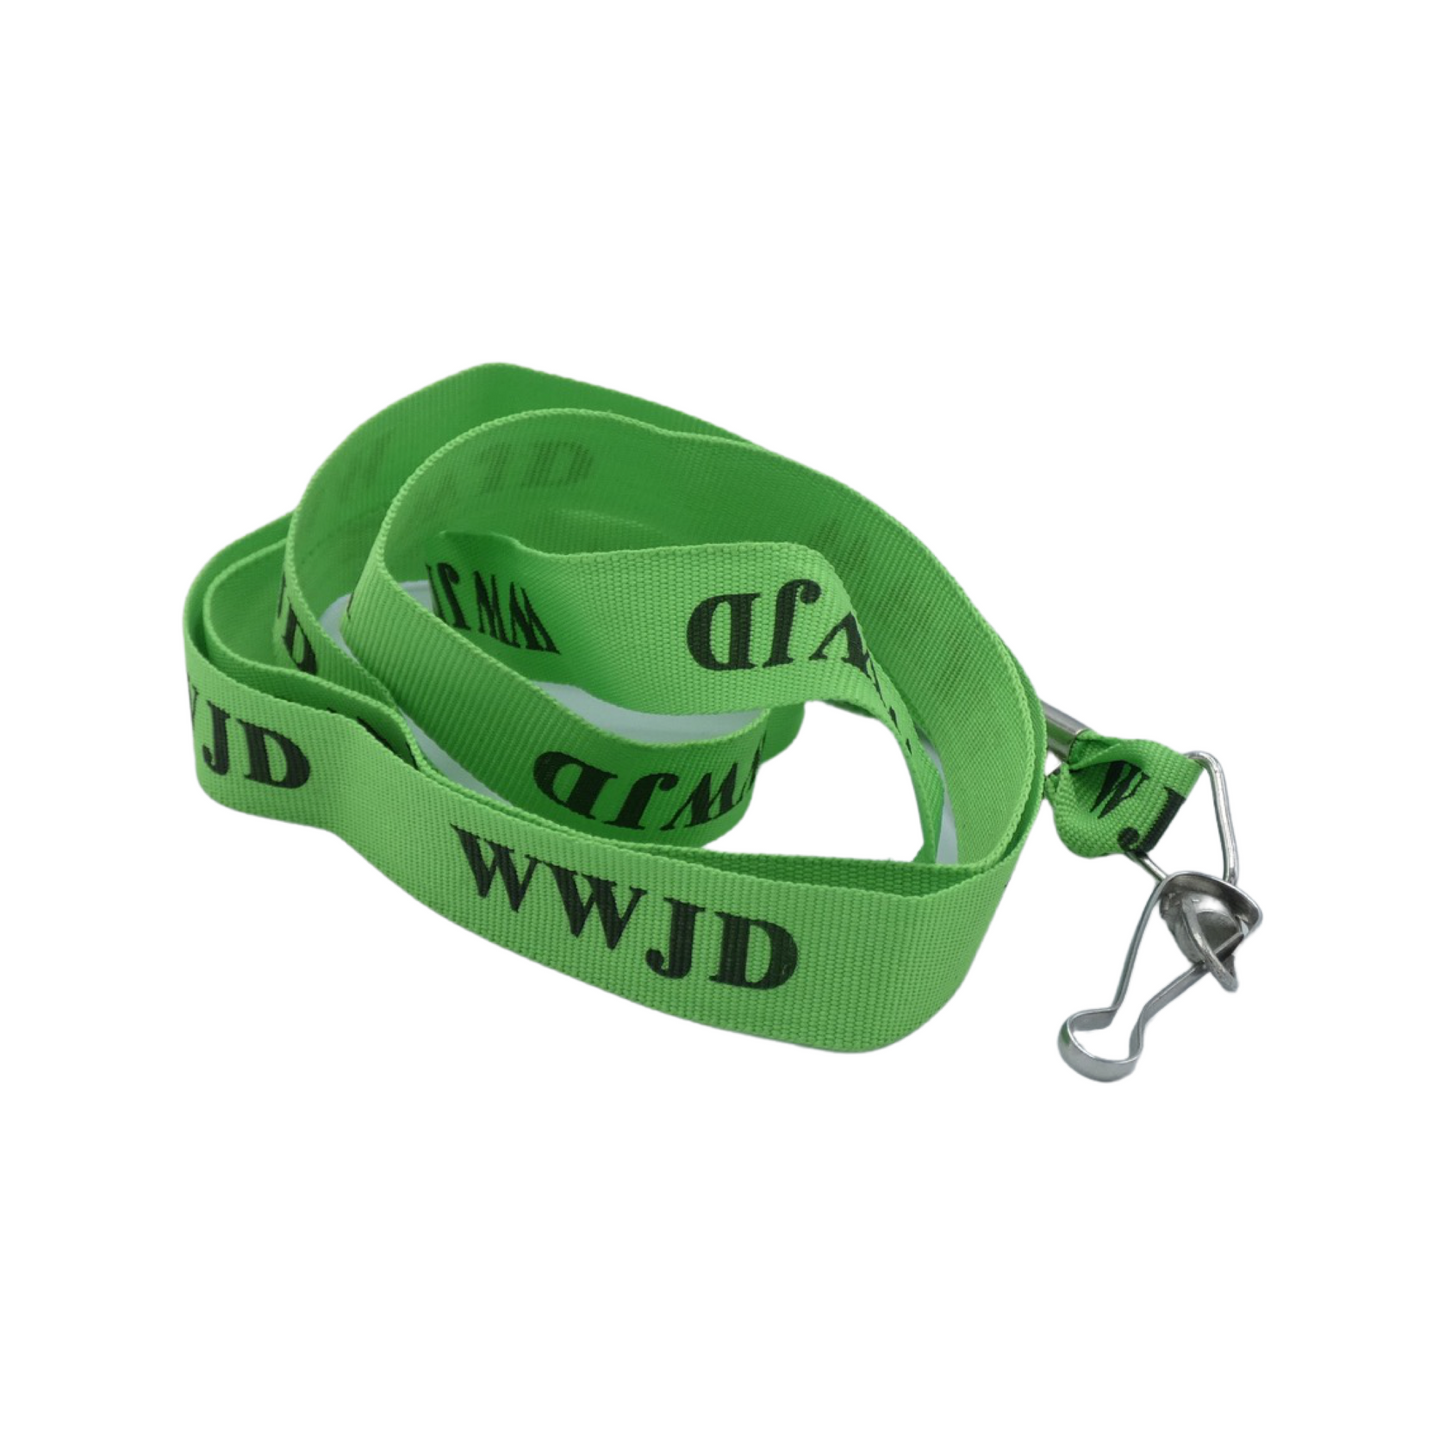 Assorted "What Would Jesus Do" (WWJD) Lanyards